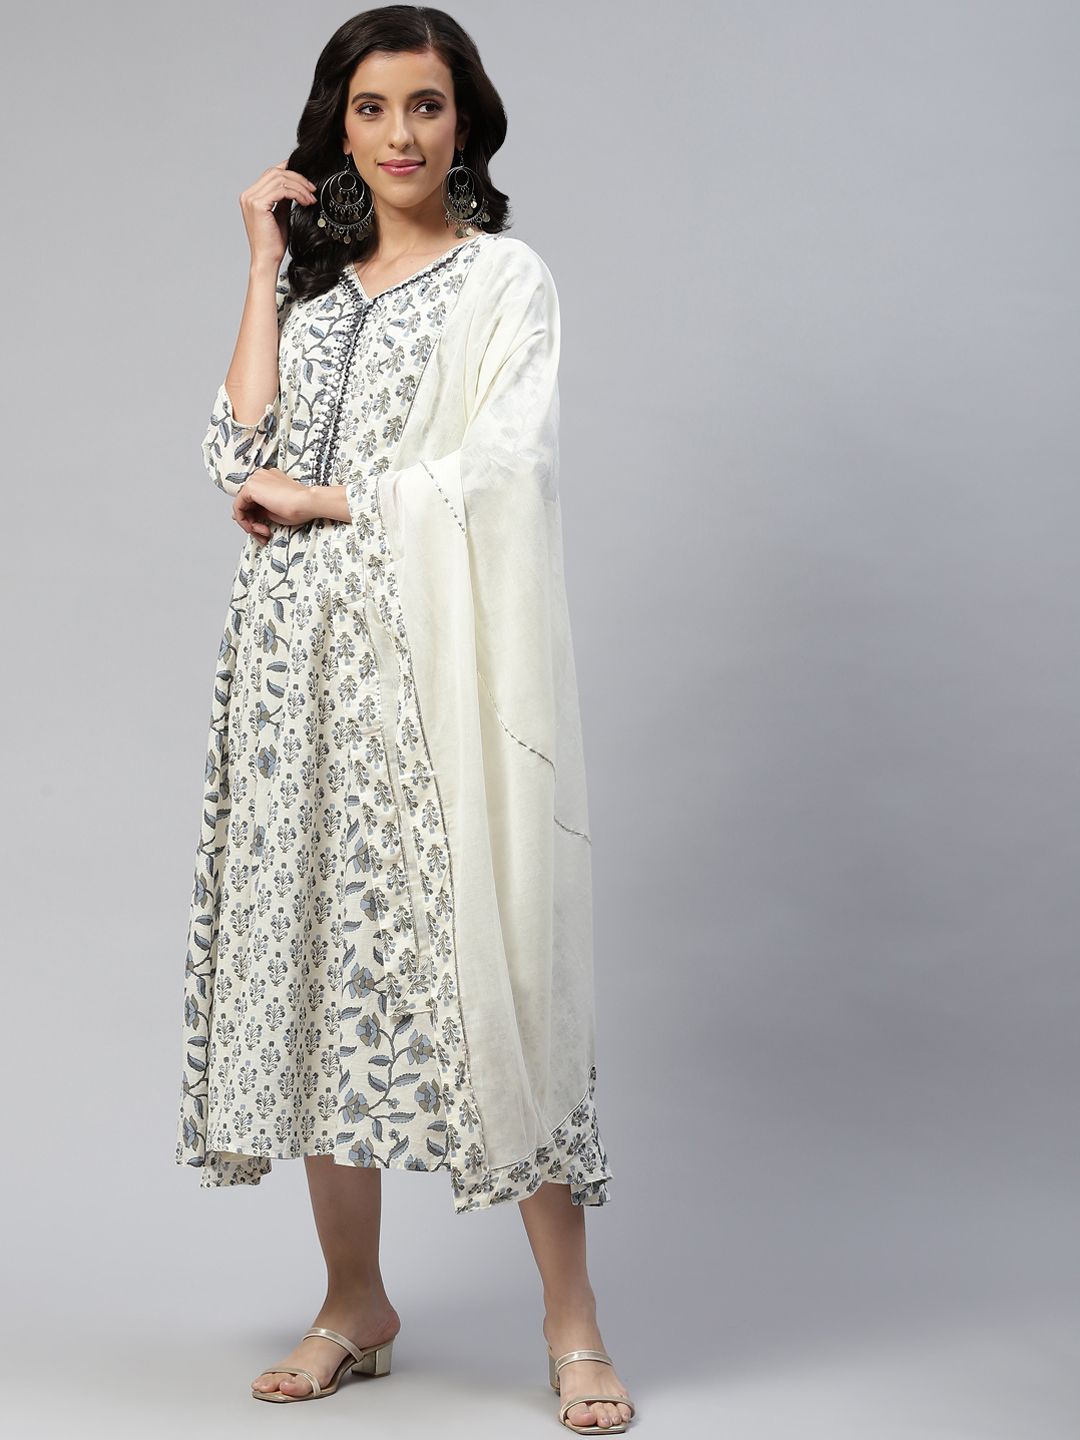 Readiprint Fashions Cream-Coloured Floral Embroidered Ethnic Maxi Dress Price in India